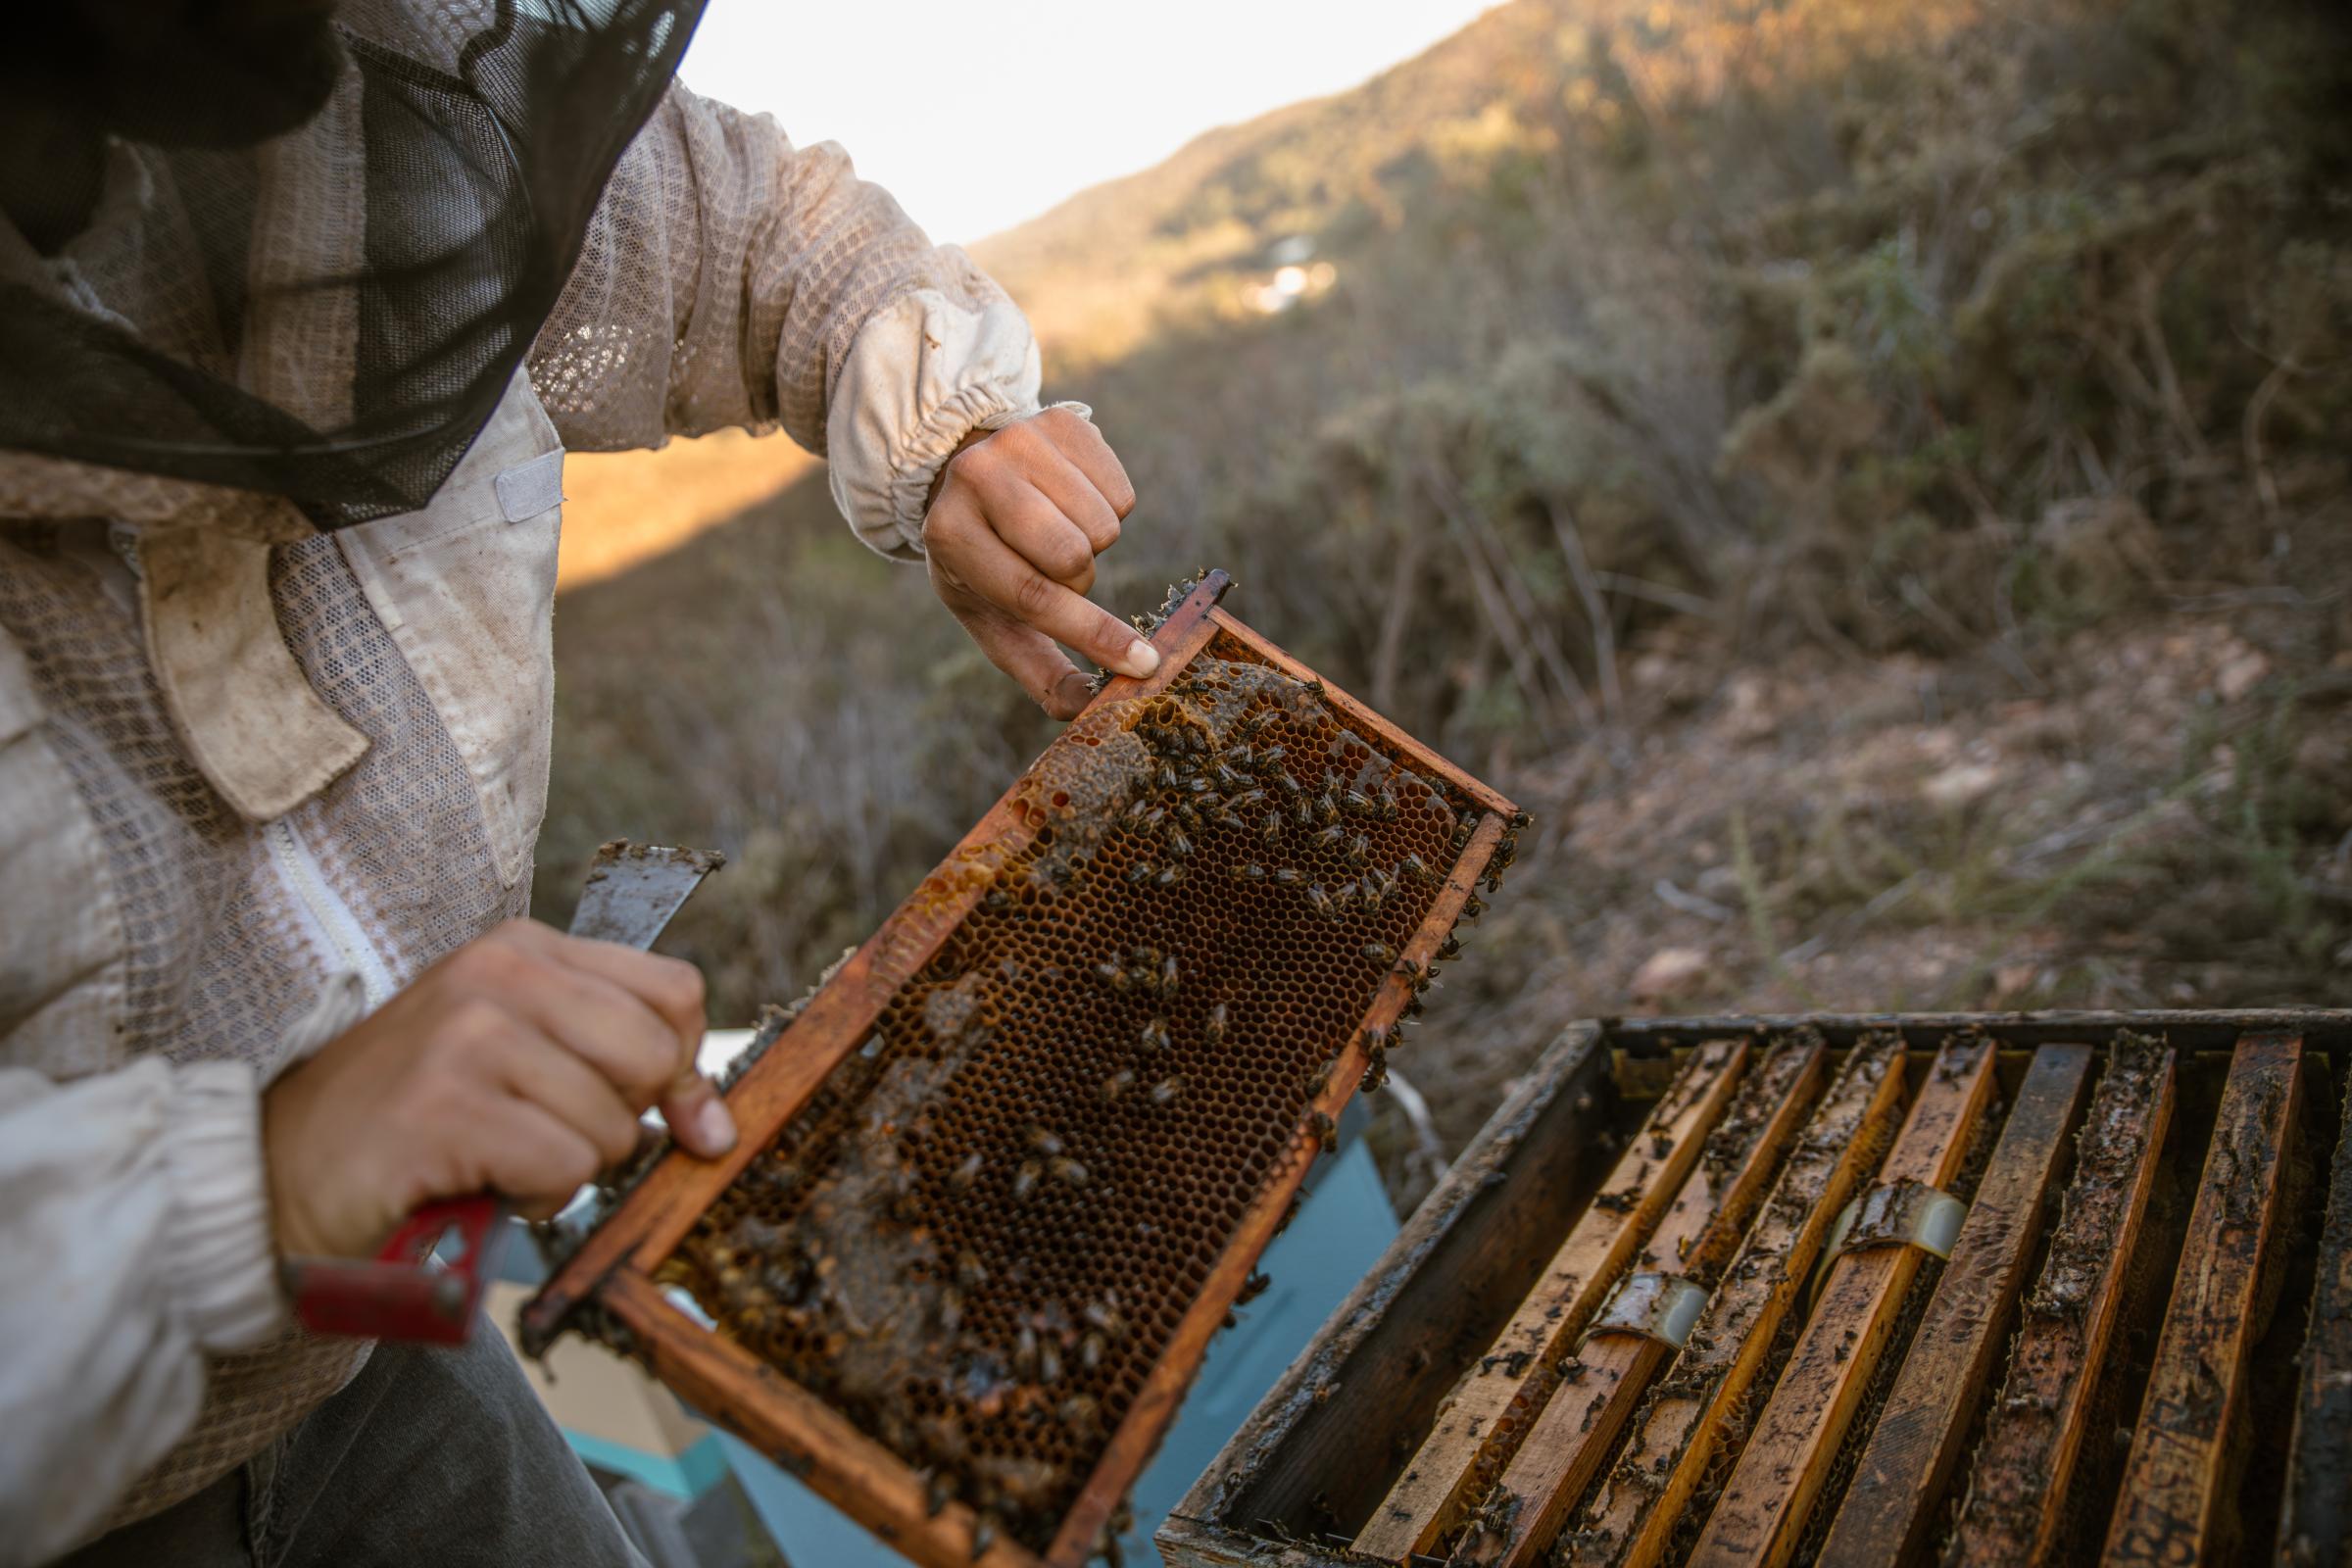 Portuguese Bee. - He chose to demonstrate his beekeeping work gloveless, as...